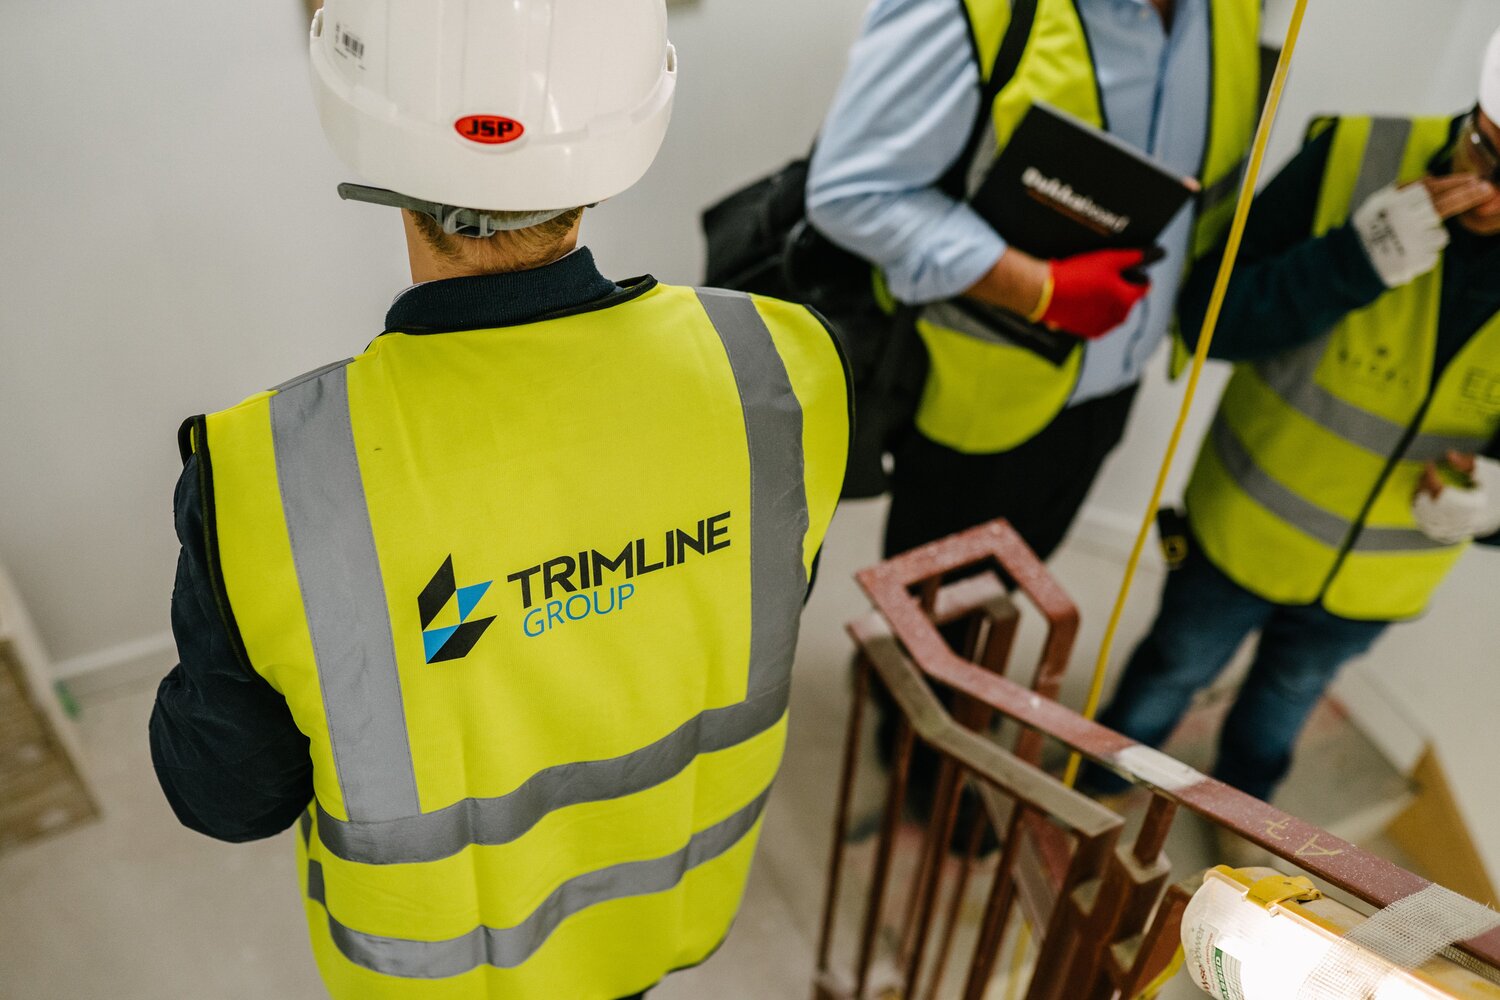 trimline team with contractors in stairwell wearing high visibility vests